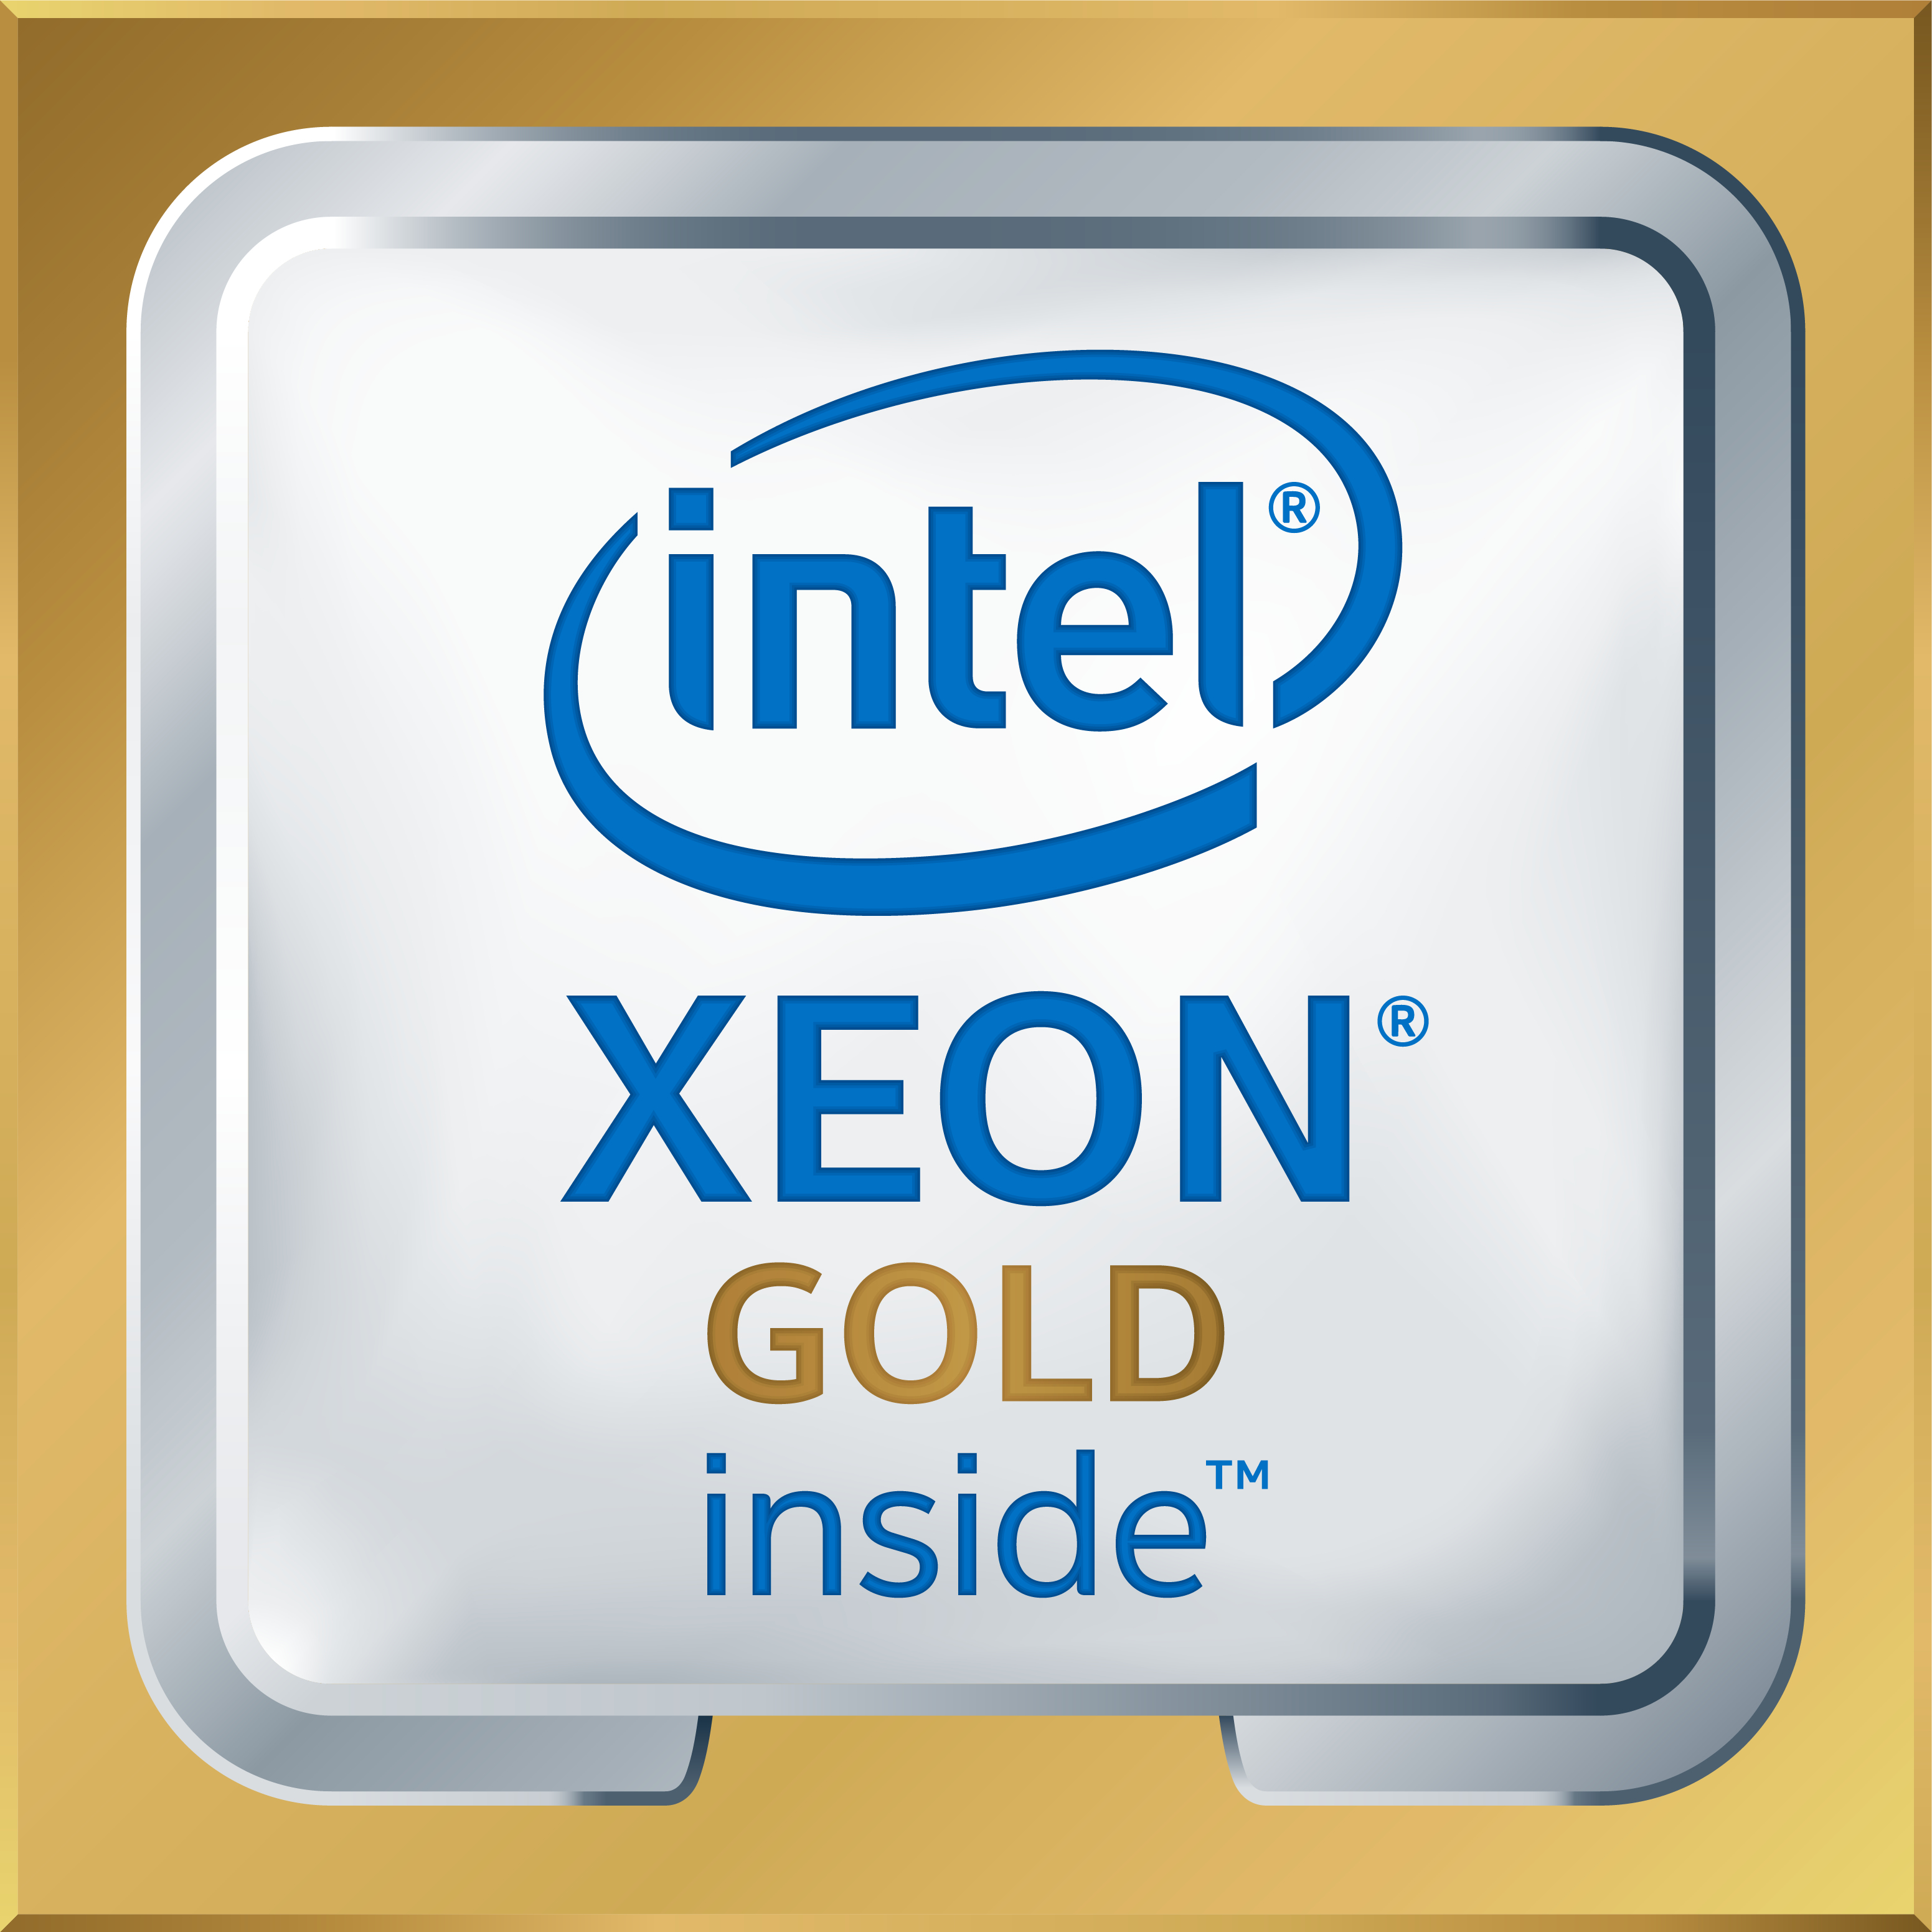 2 x Intel Xeon Gold 5118 - 2.3 GHz - 12-core - 16.5 MB cache - for ThinkSystem SN850